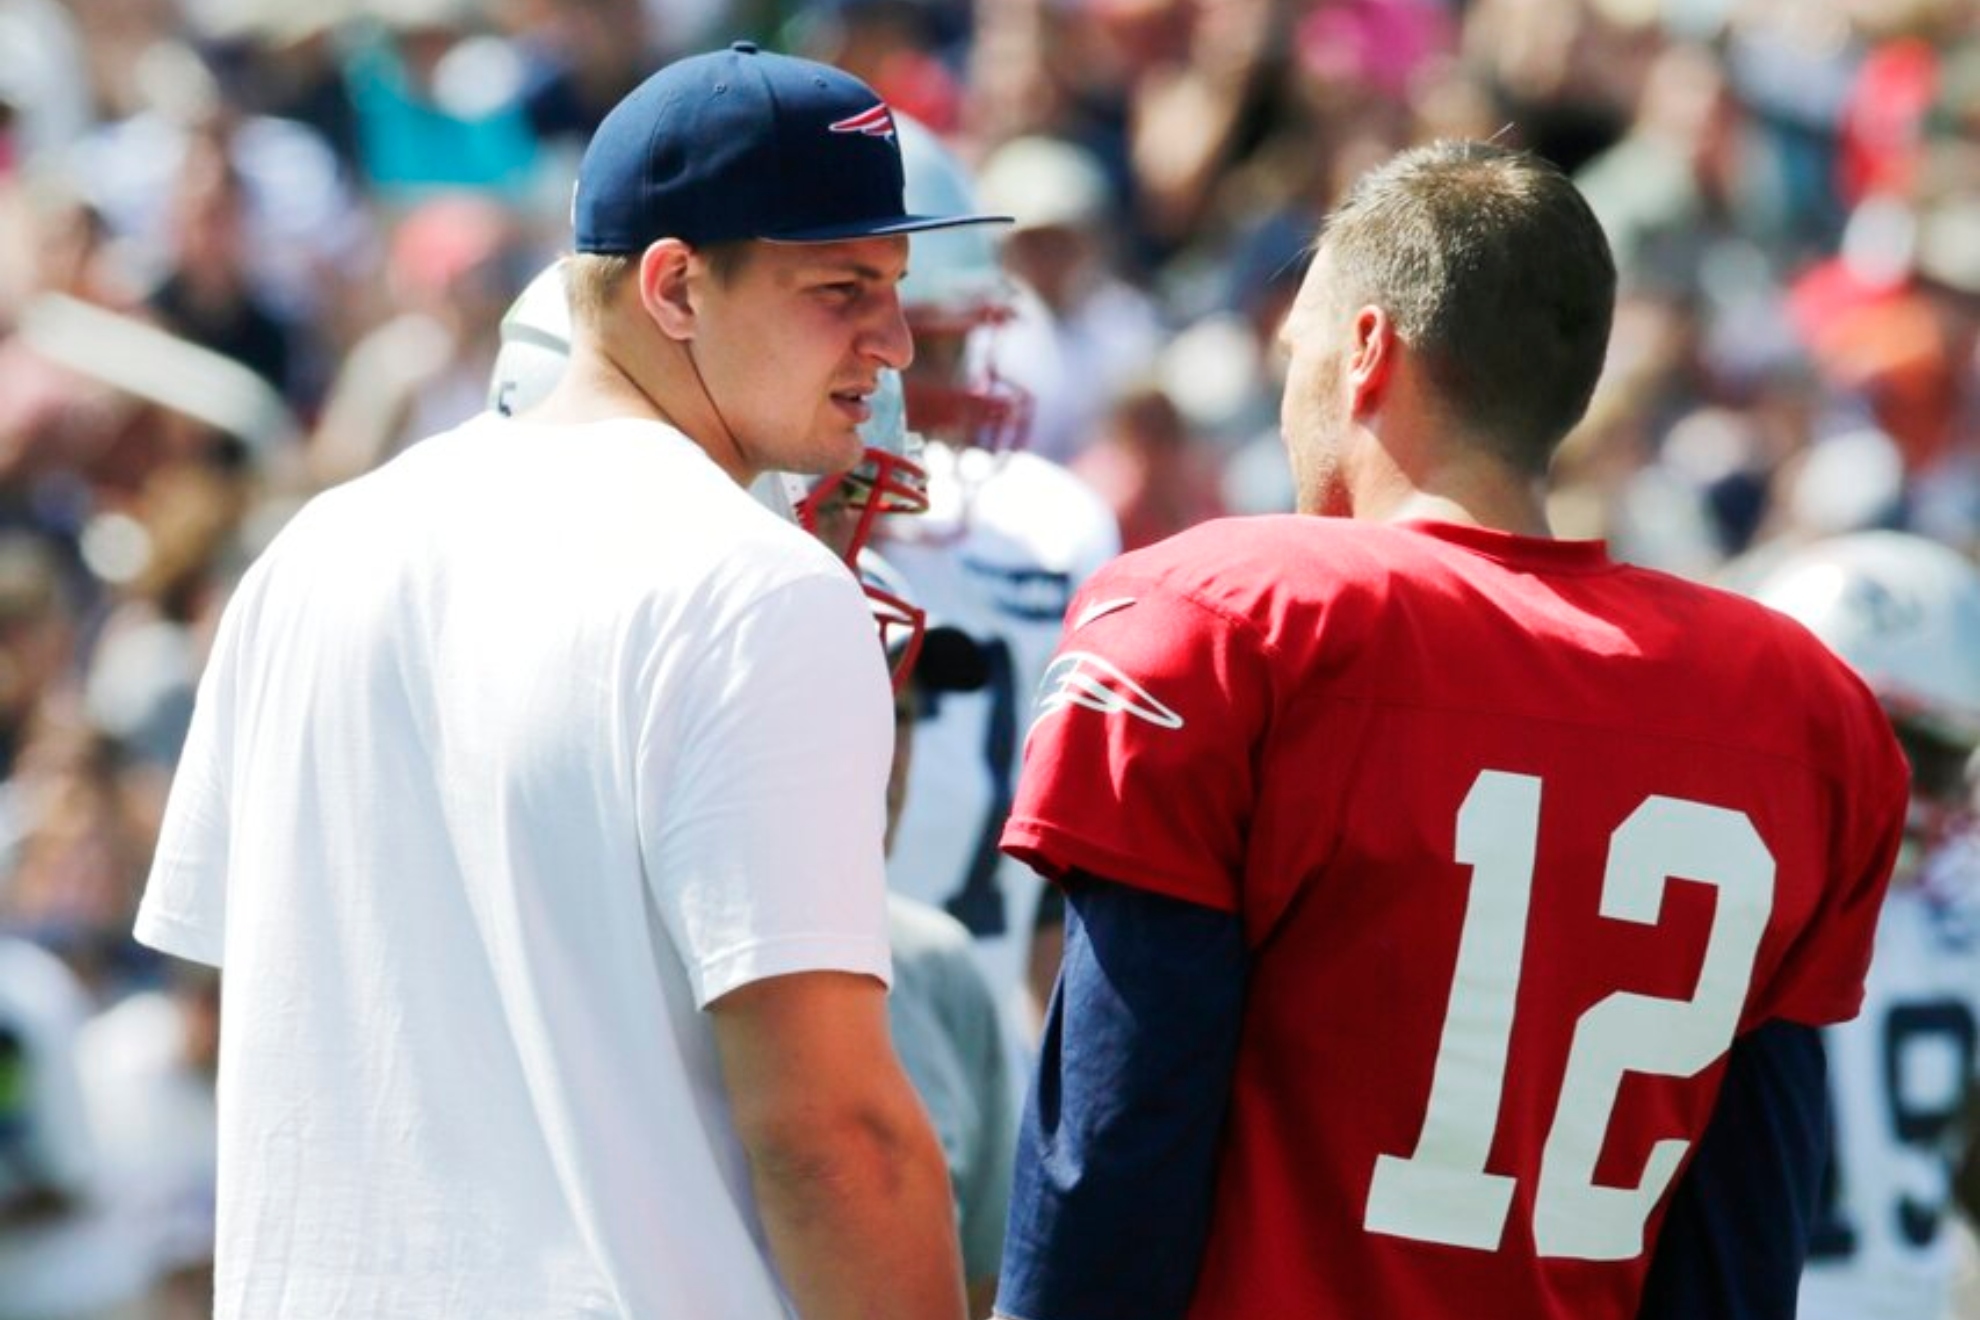 The call between Tom Brady and Rob Gronkowski that made him burst into tears